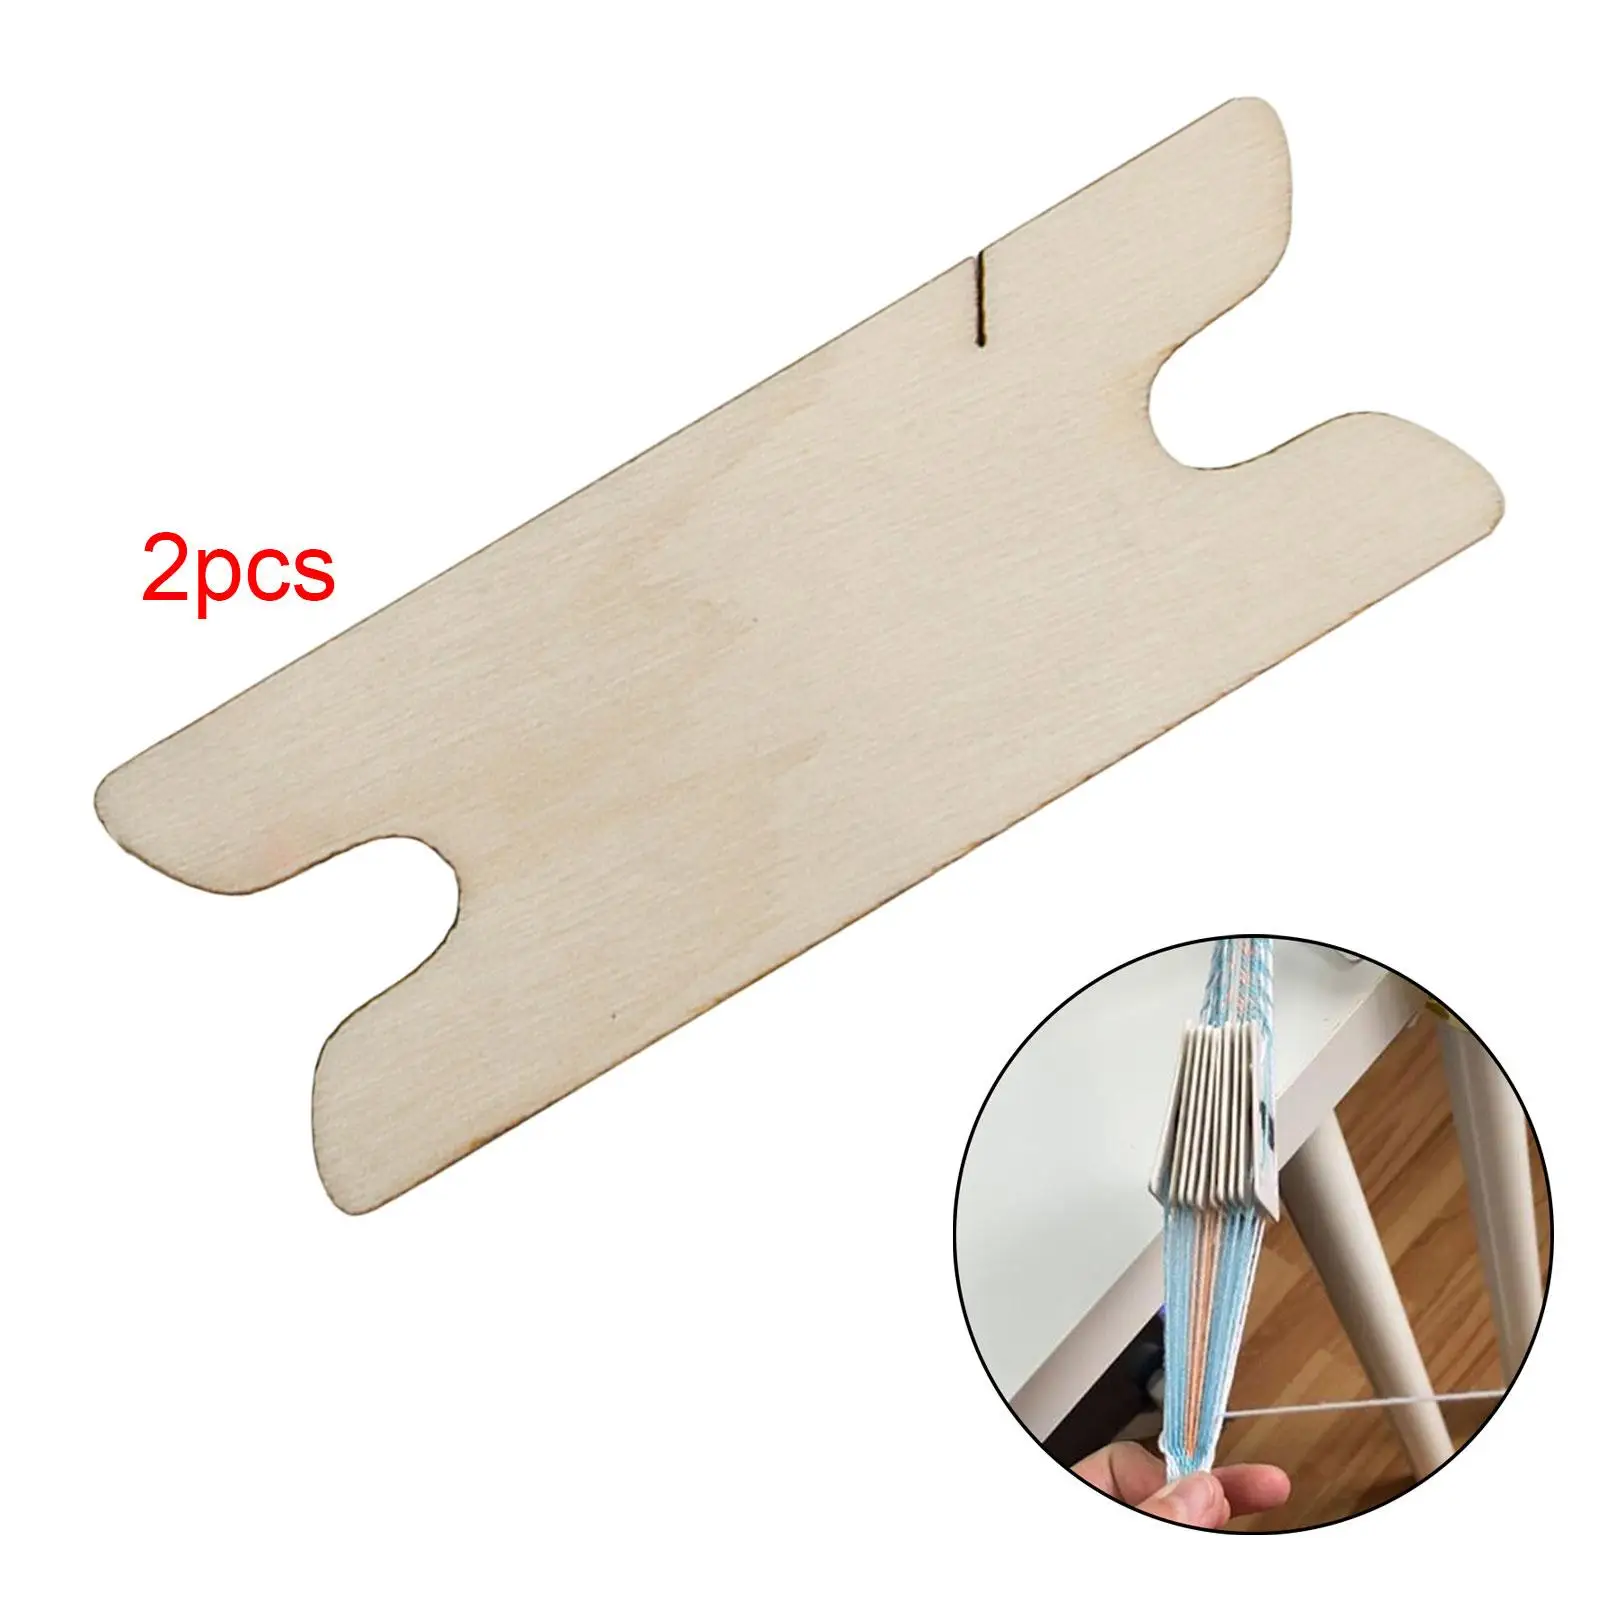 2x Wooden Weaving Shuttle Tapestry Beginners Handcrafts Sweater Loom Tools Knitting Crafts Adults Tatting Shuttle Wood Hand Loom